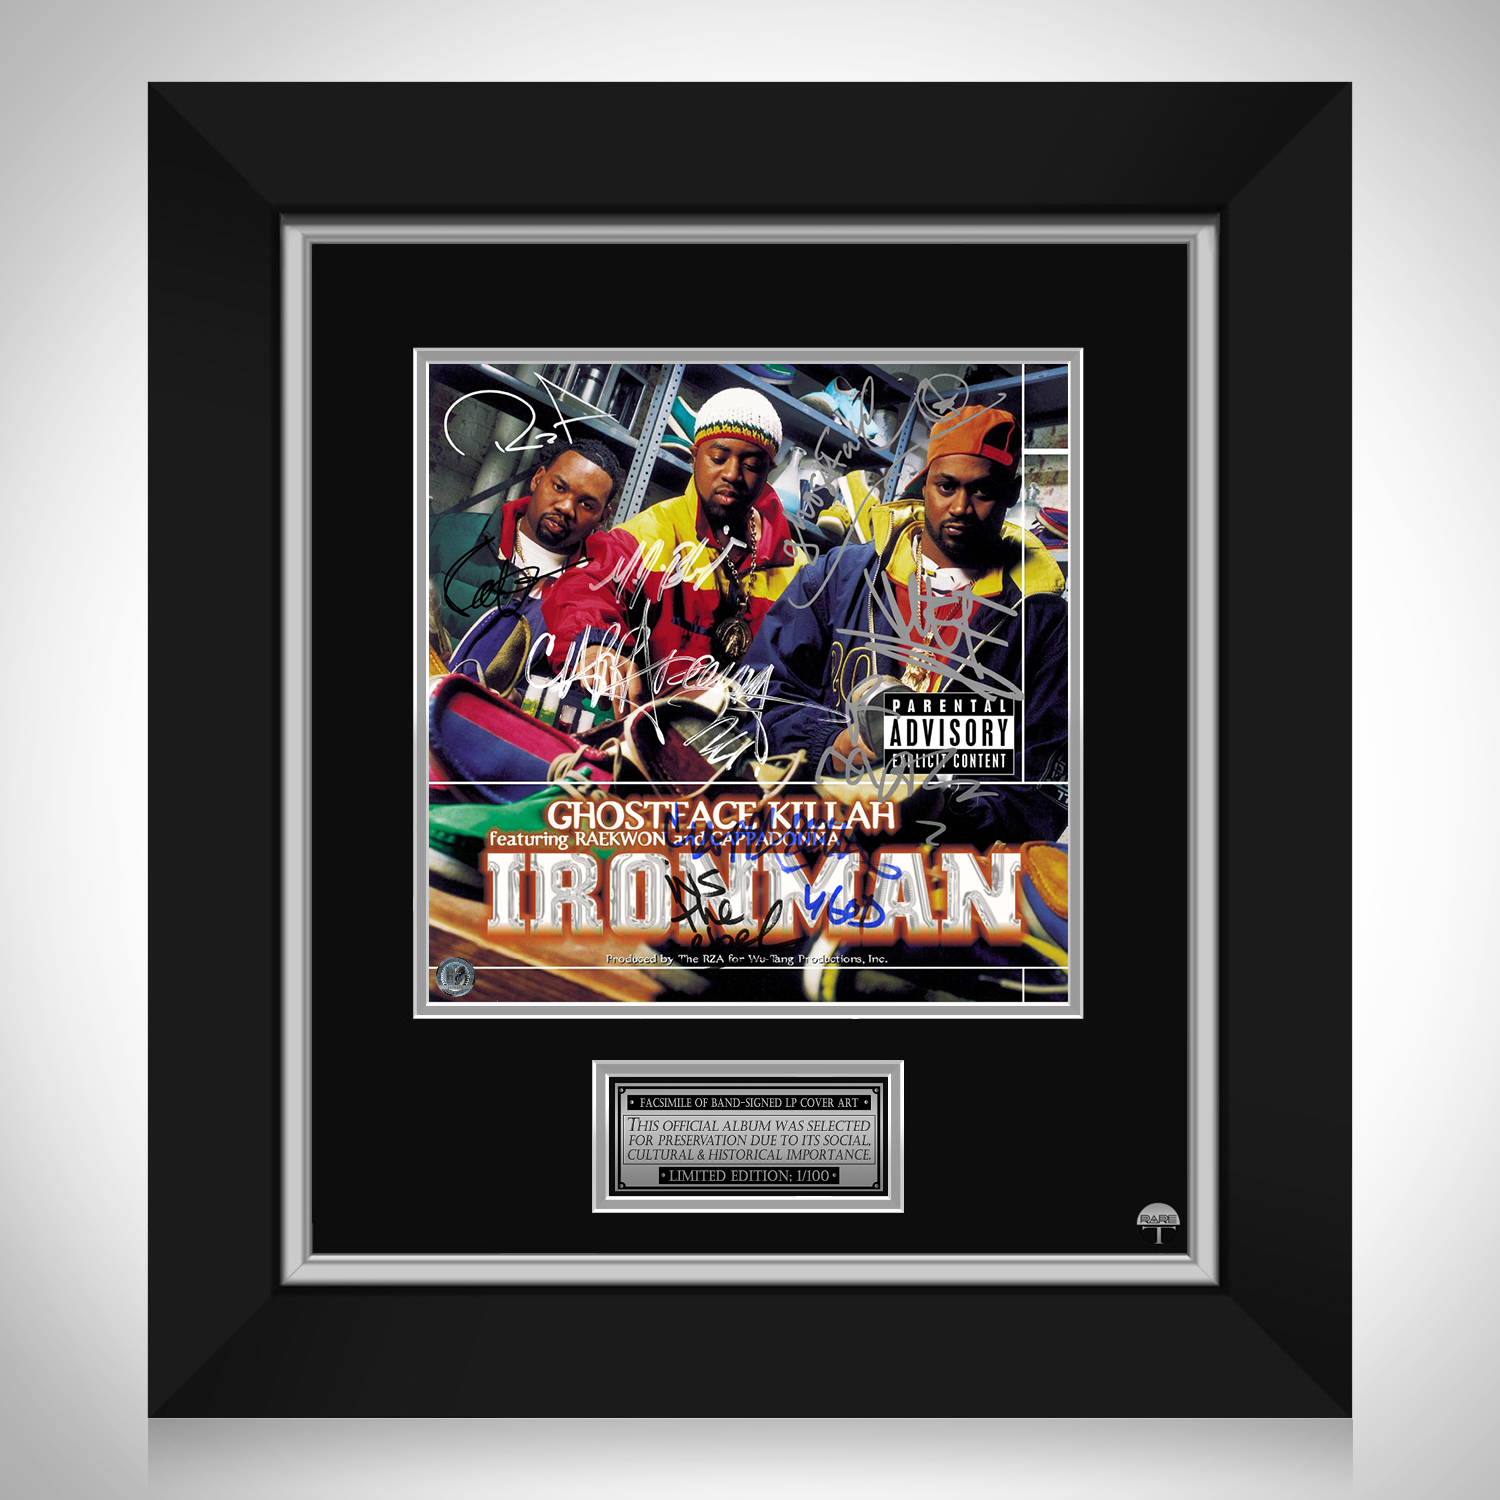 Ghostface Killah - Ironman LP Cover Limited Signature Edition 